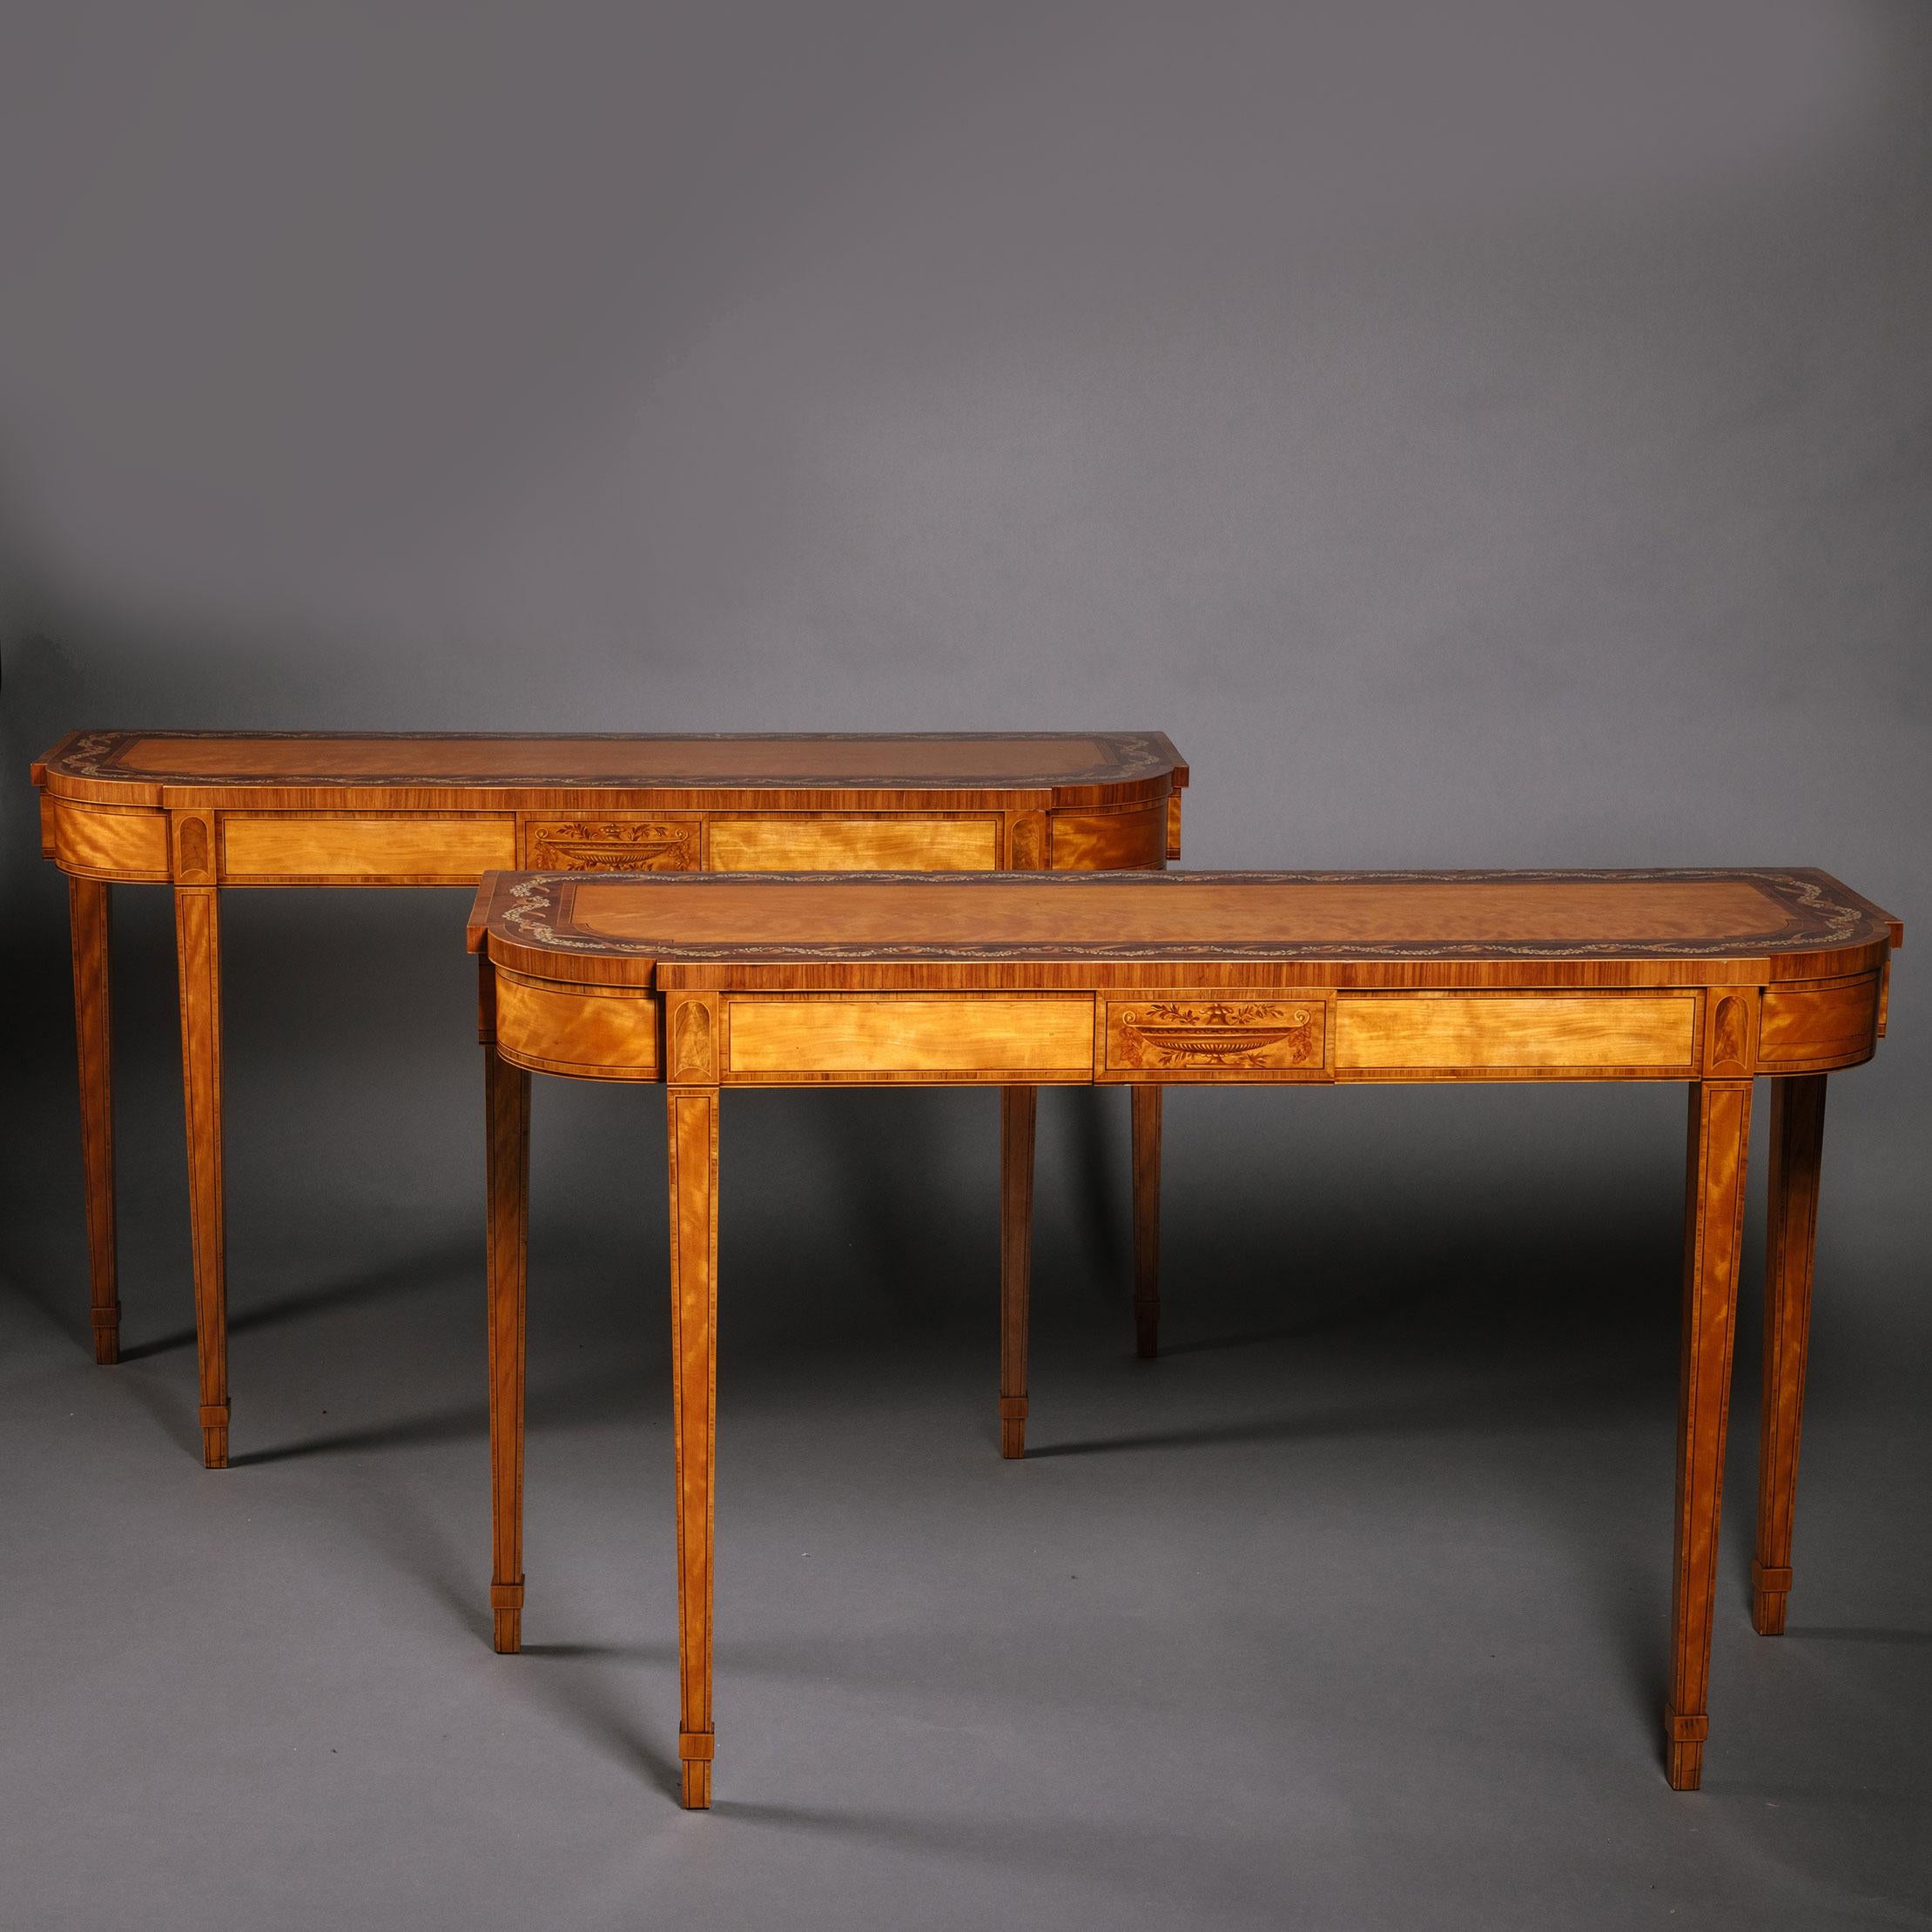 Painted Pair of George III Polychrome-Decorated Satinwood Console Tables For Sale